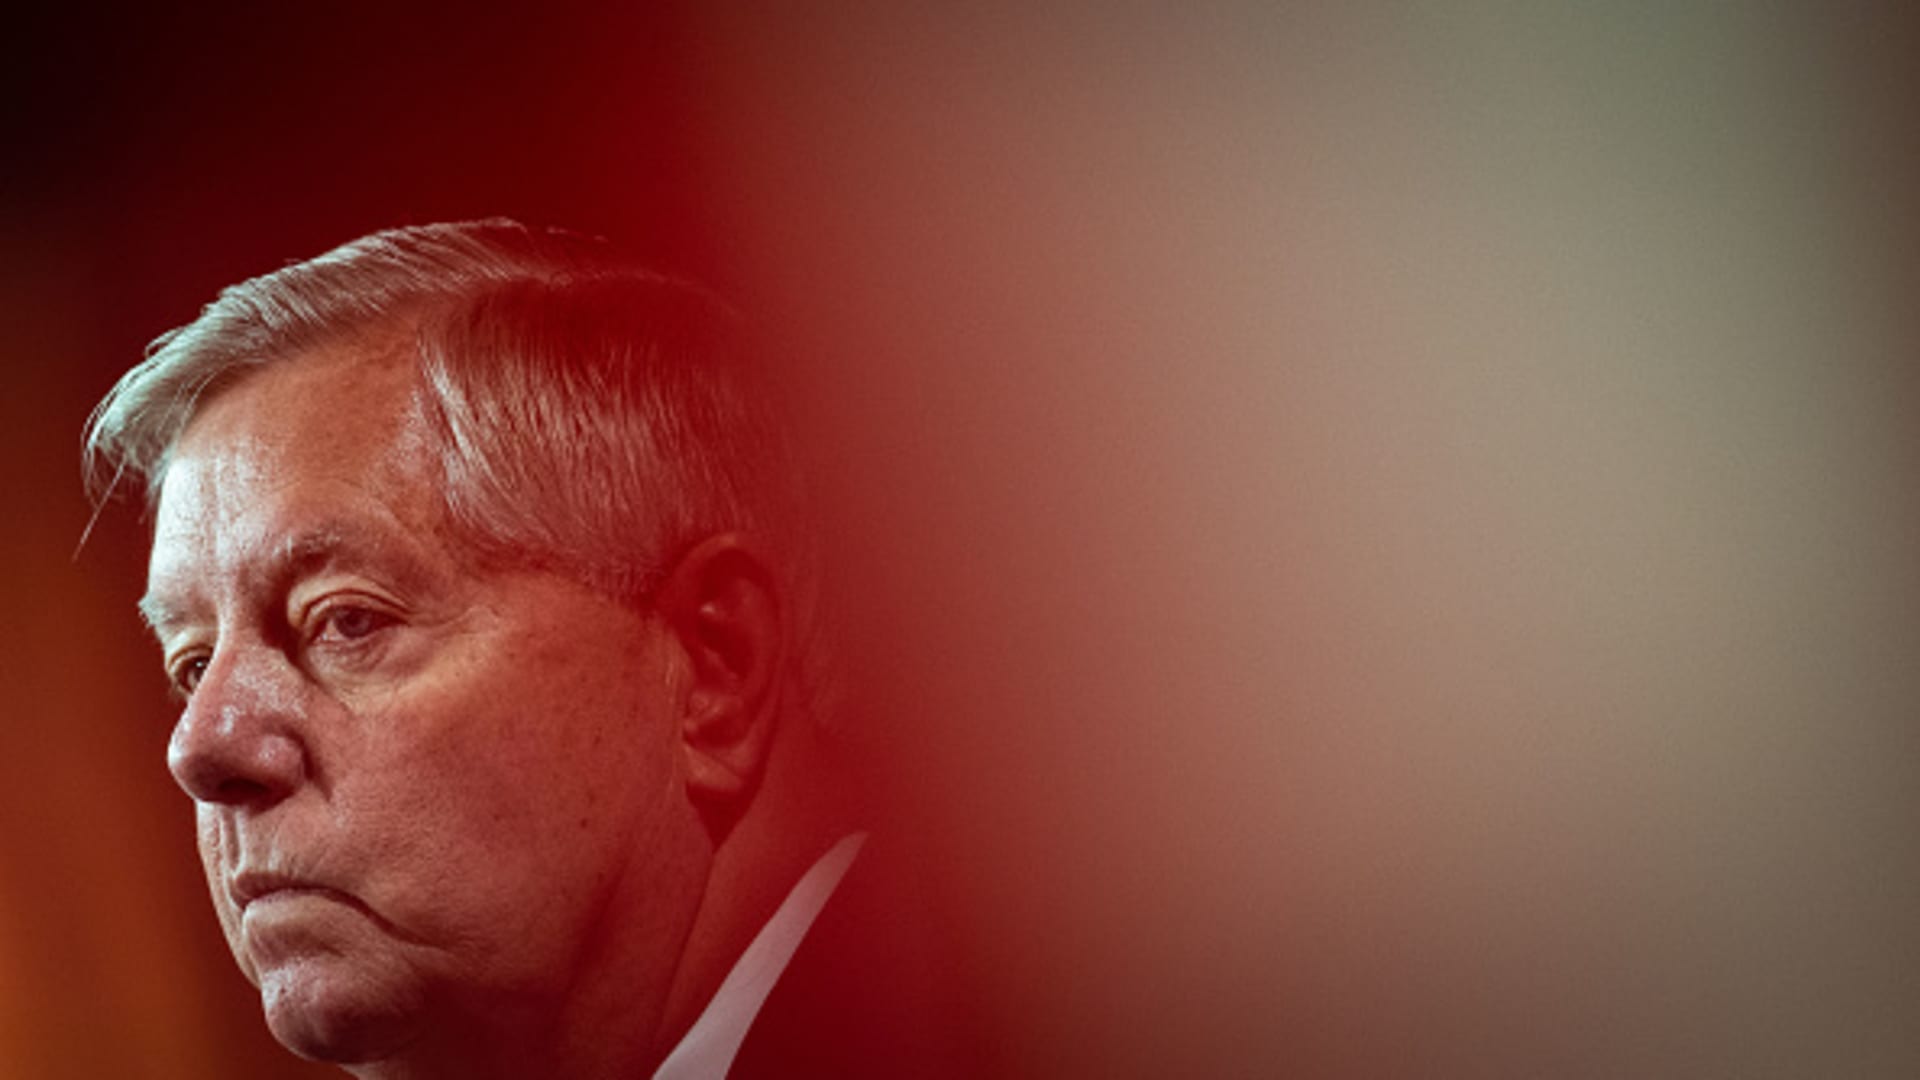 Climate reparations are not going to be helpful, U.S. Sen. Lindsey Graham says